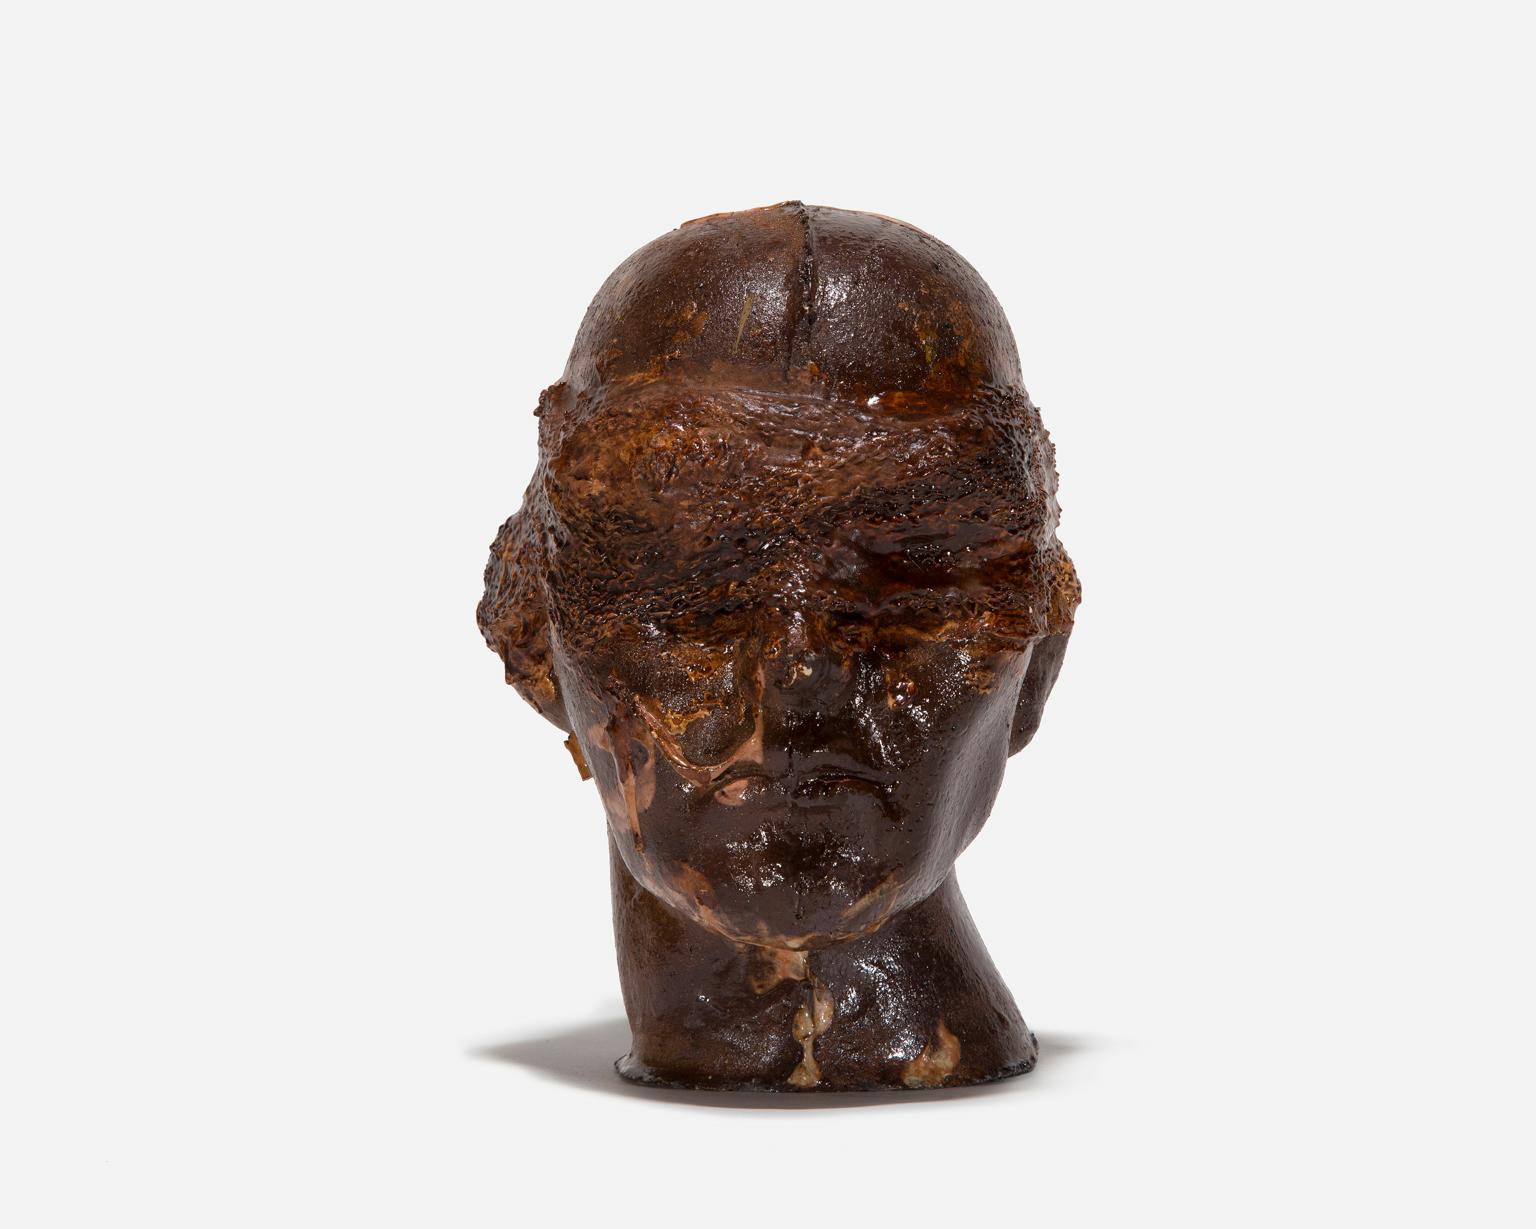 Life-Sized Ceramic Blindfolded Head, Russet-Colored - Sculpture by Tony Hepburn